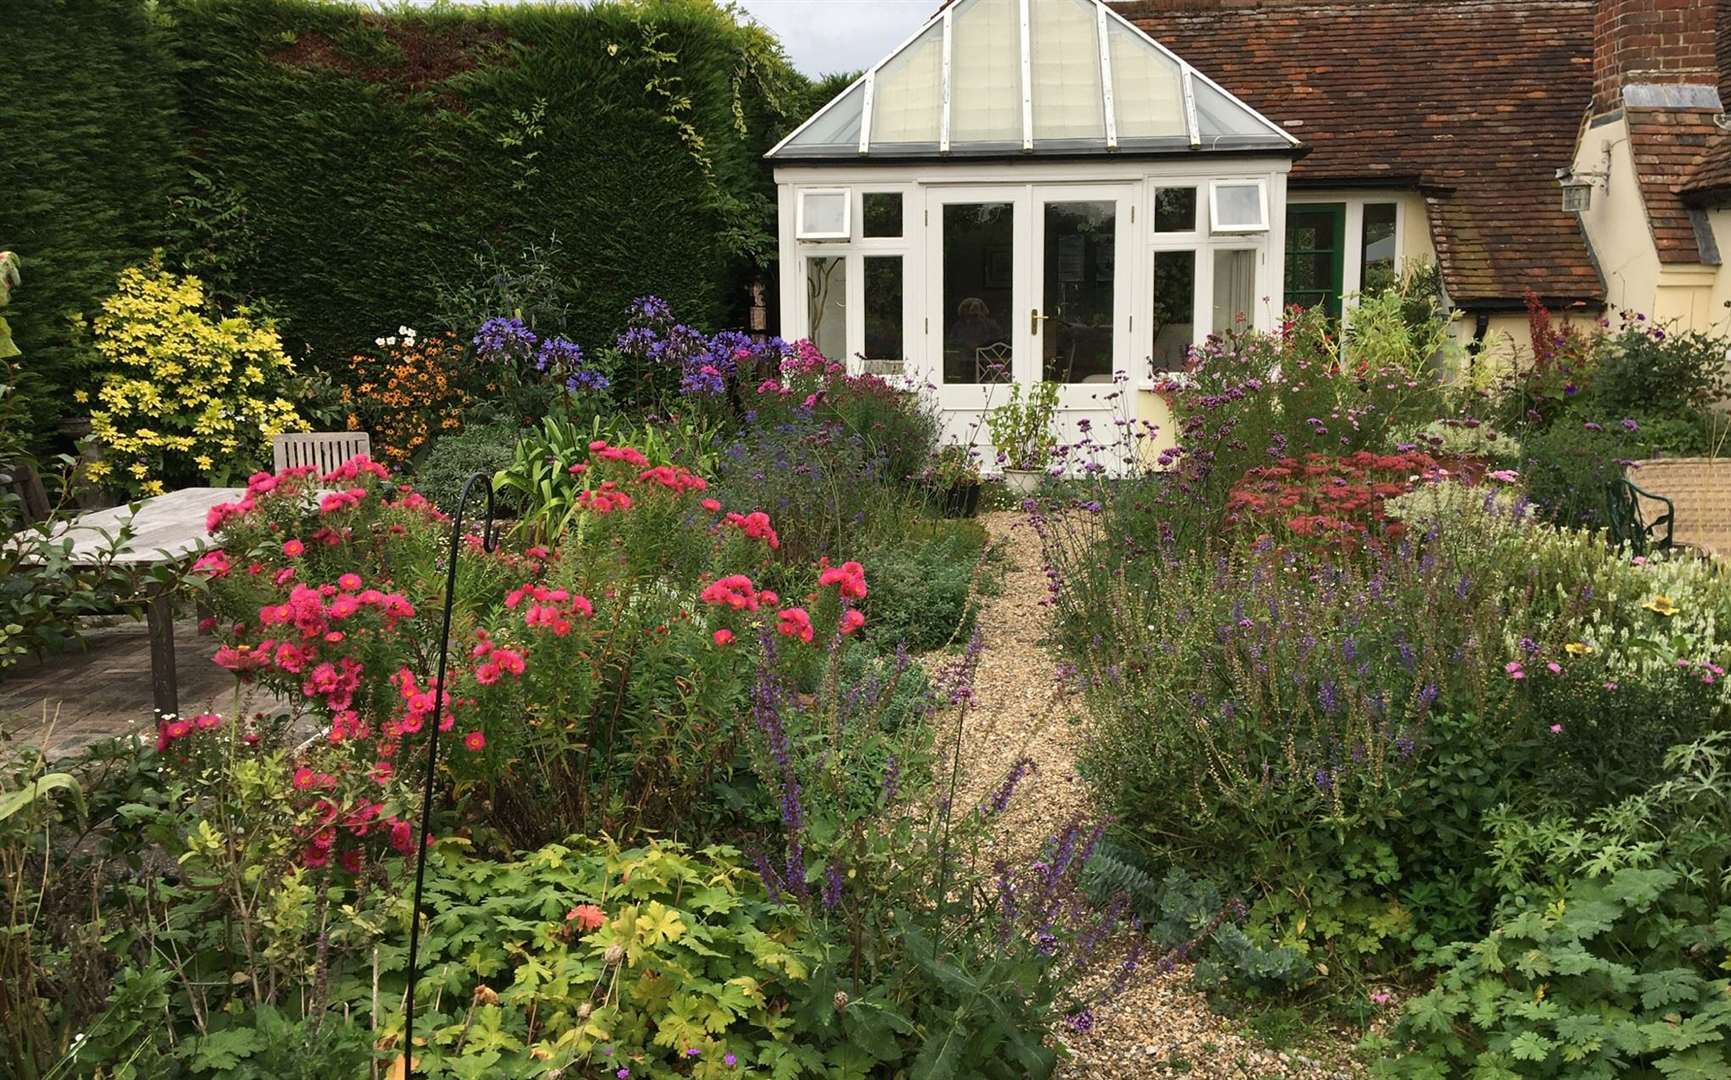 The farm has a lake, fields and English country gardens. Picture: National Garden Scheme